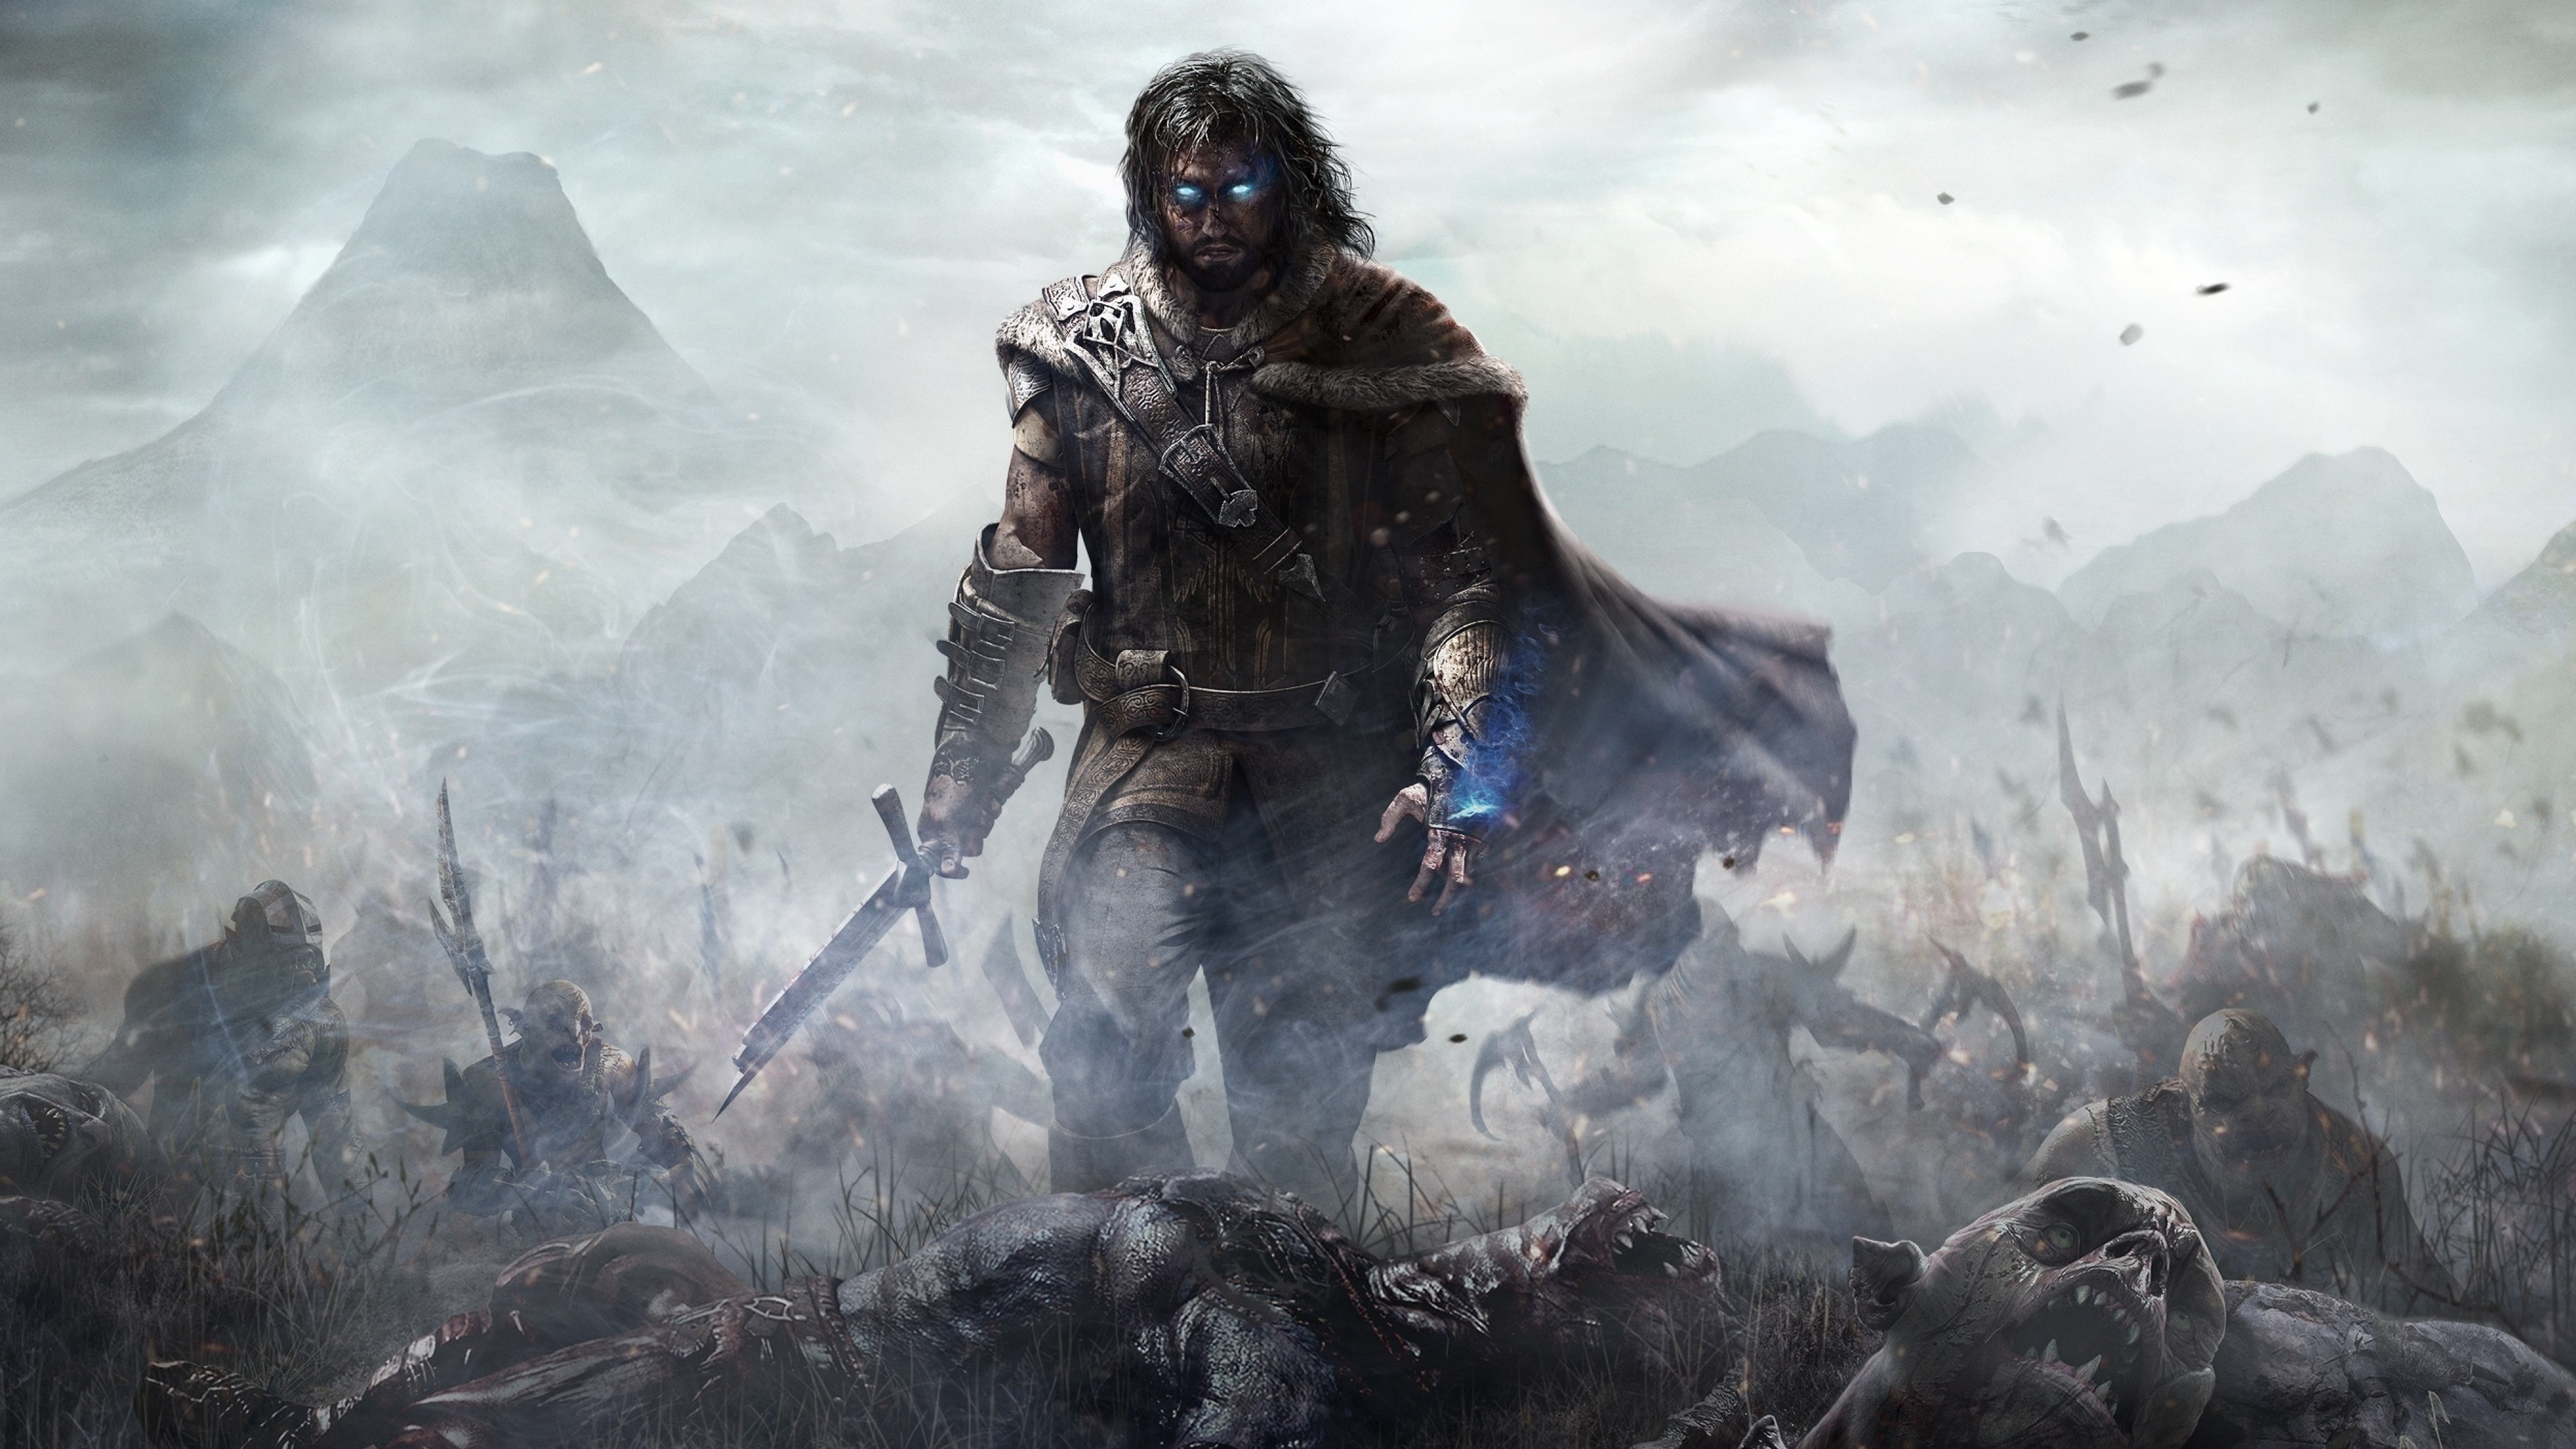 3840x2160-resolution-middle-earth-shadow-of-mordor-monolith-productions-warner-brothers